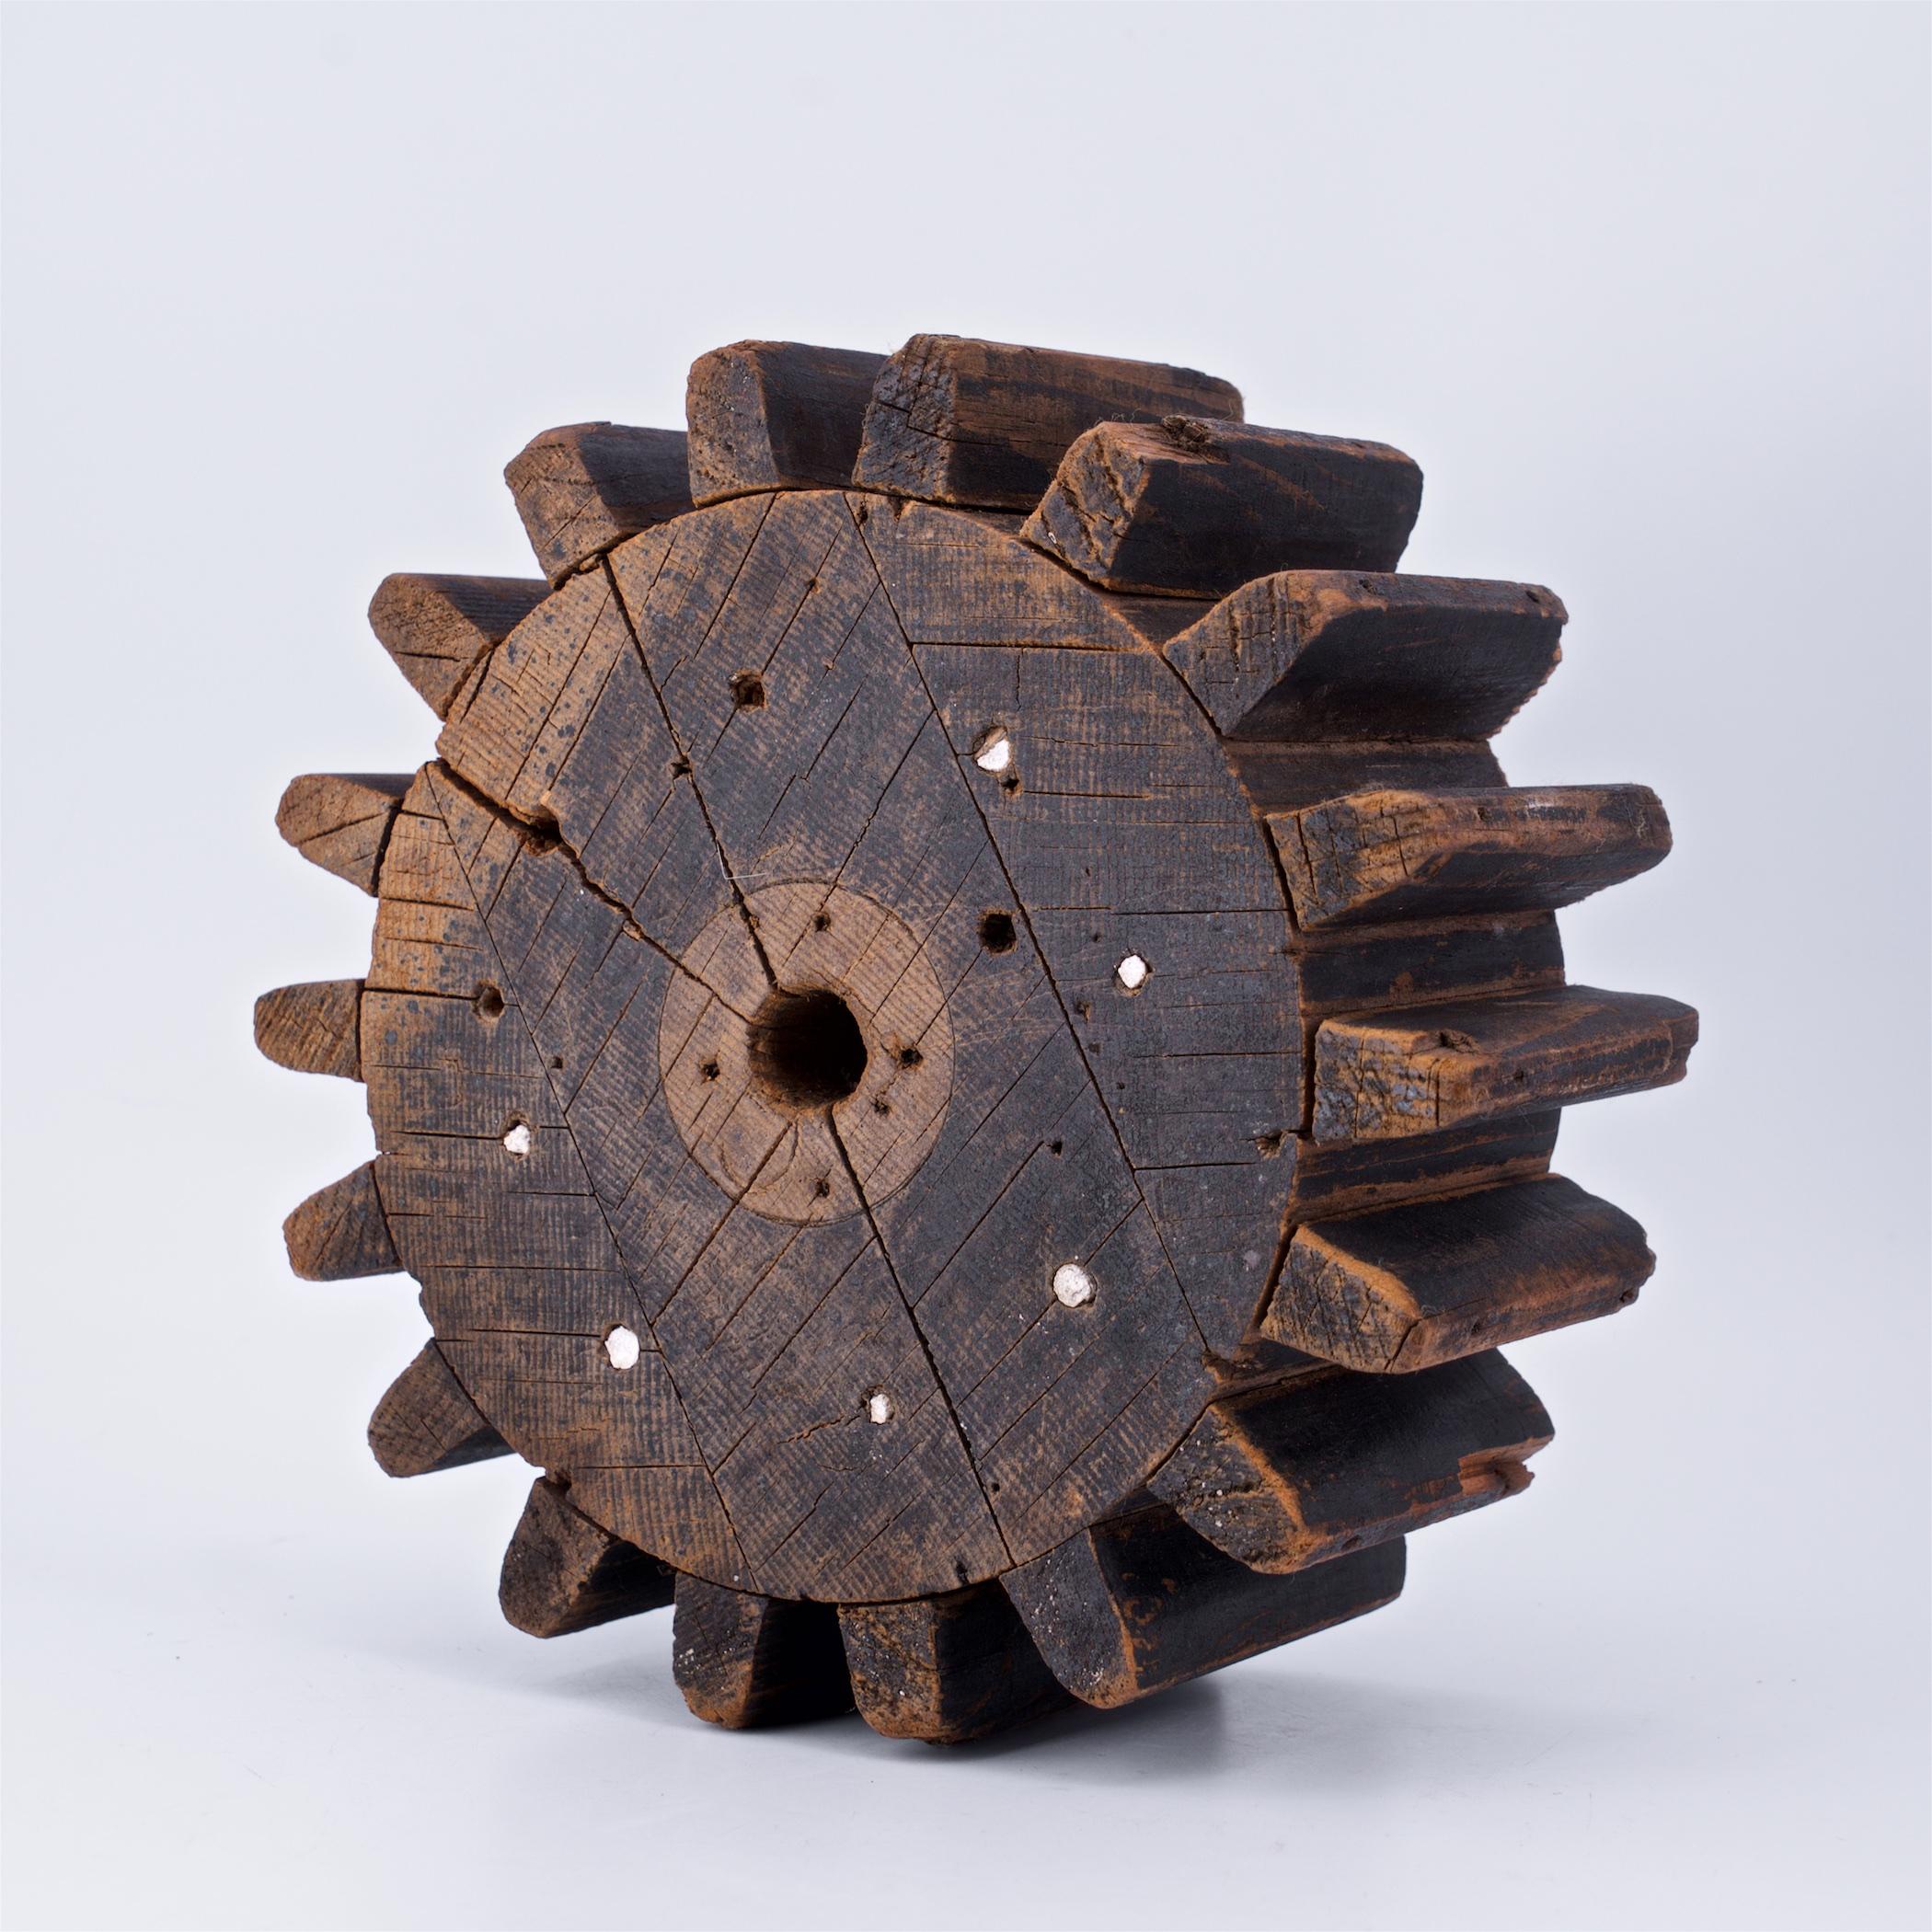 1930s Industrial Wooden Gear Table Sculpture Decor Foundry Factory Object In Distressed Condition In Hyattsville, MD